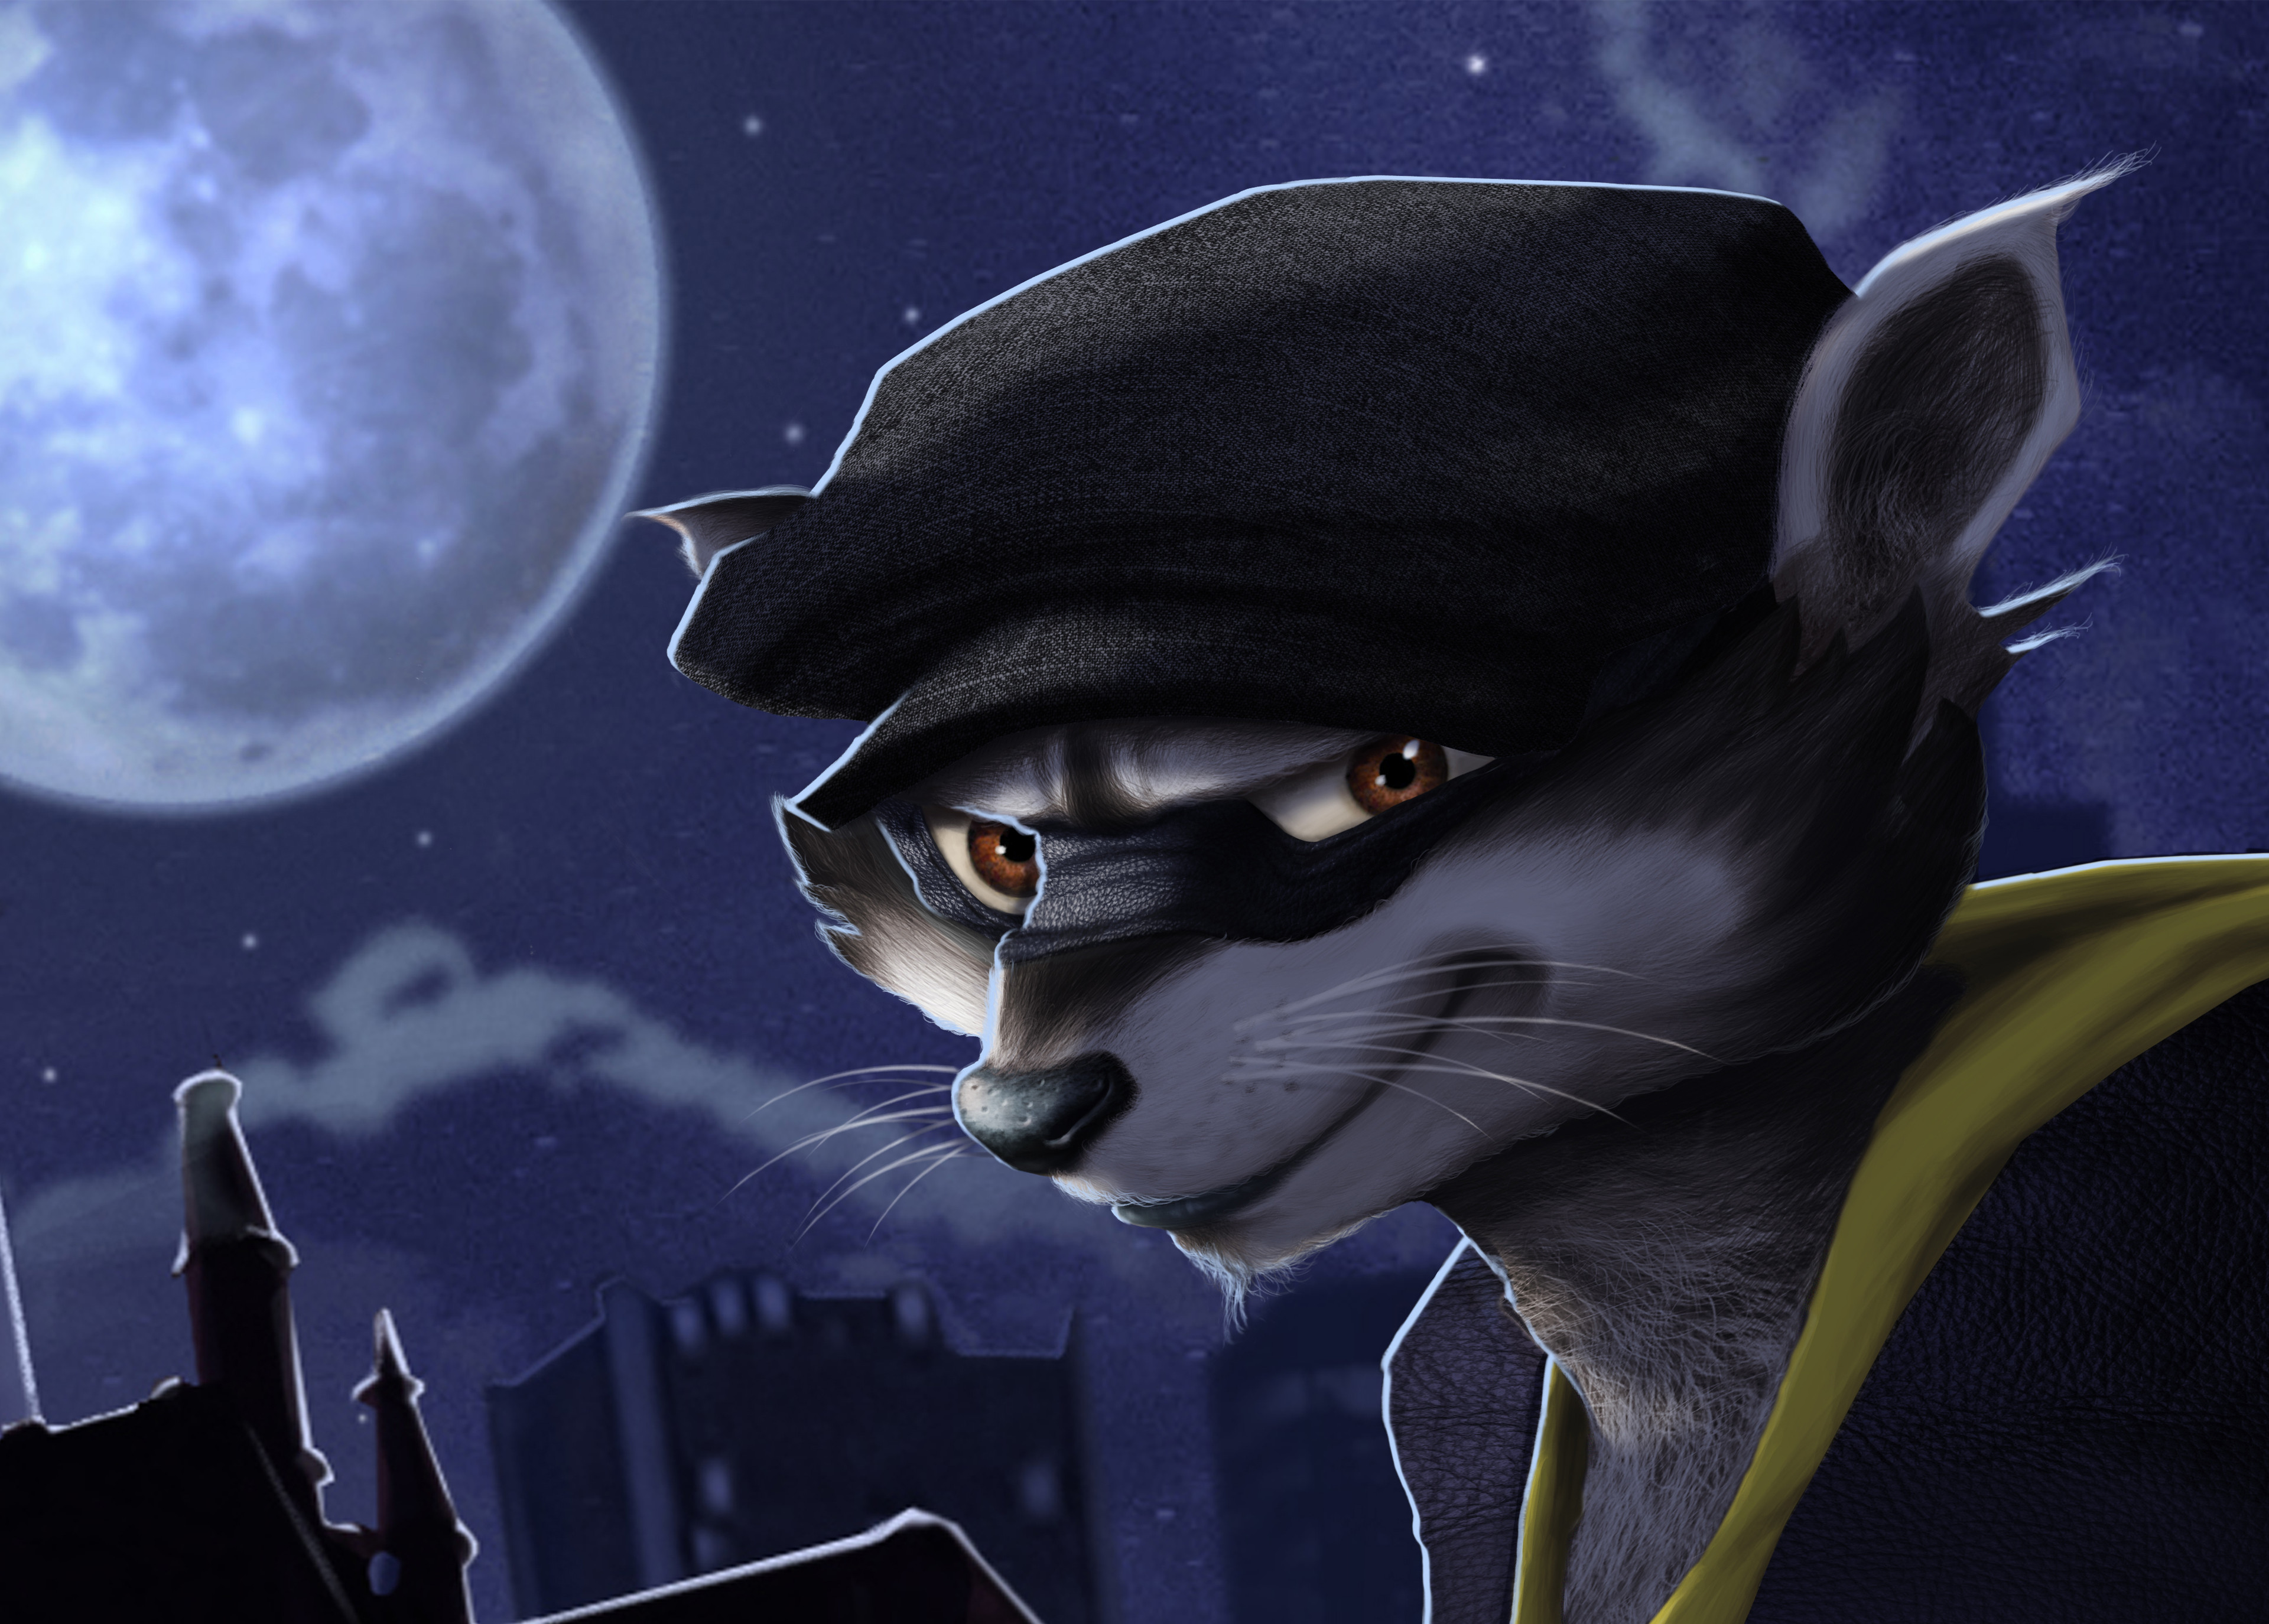 Sly Cooper movie announced for 2016 : r/Games